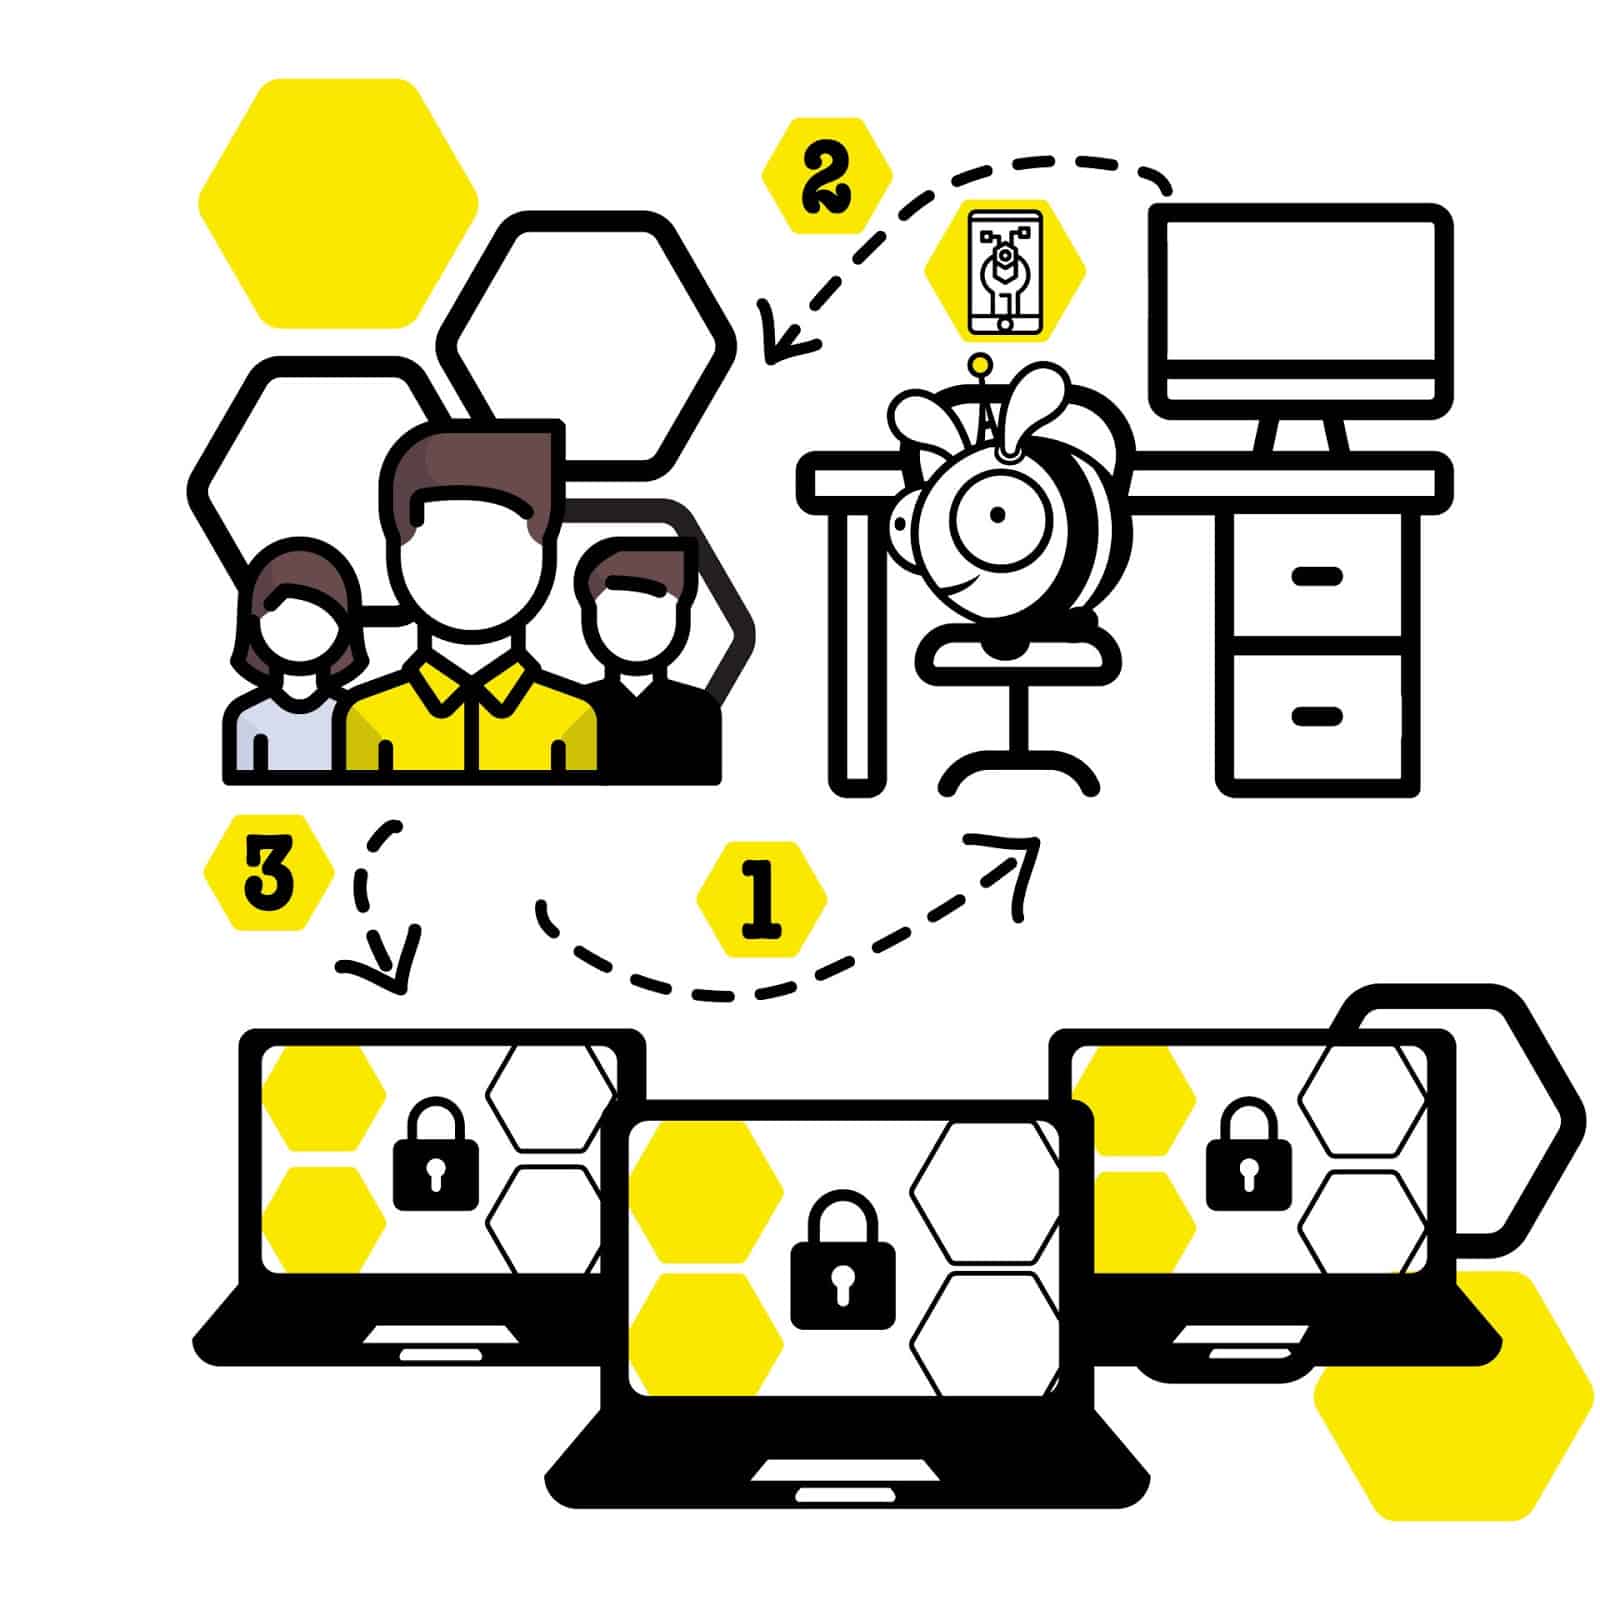 branded graphic a customer repsonse guide, image of laptops, people and honeybee.